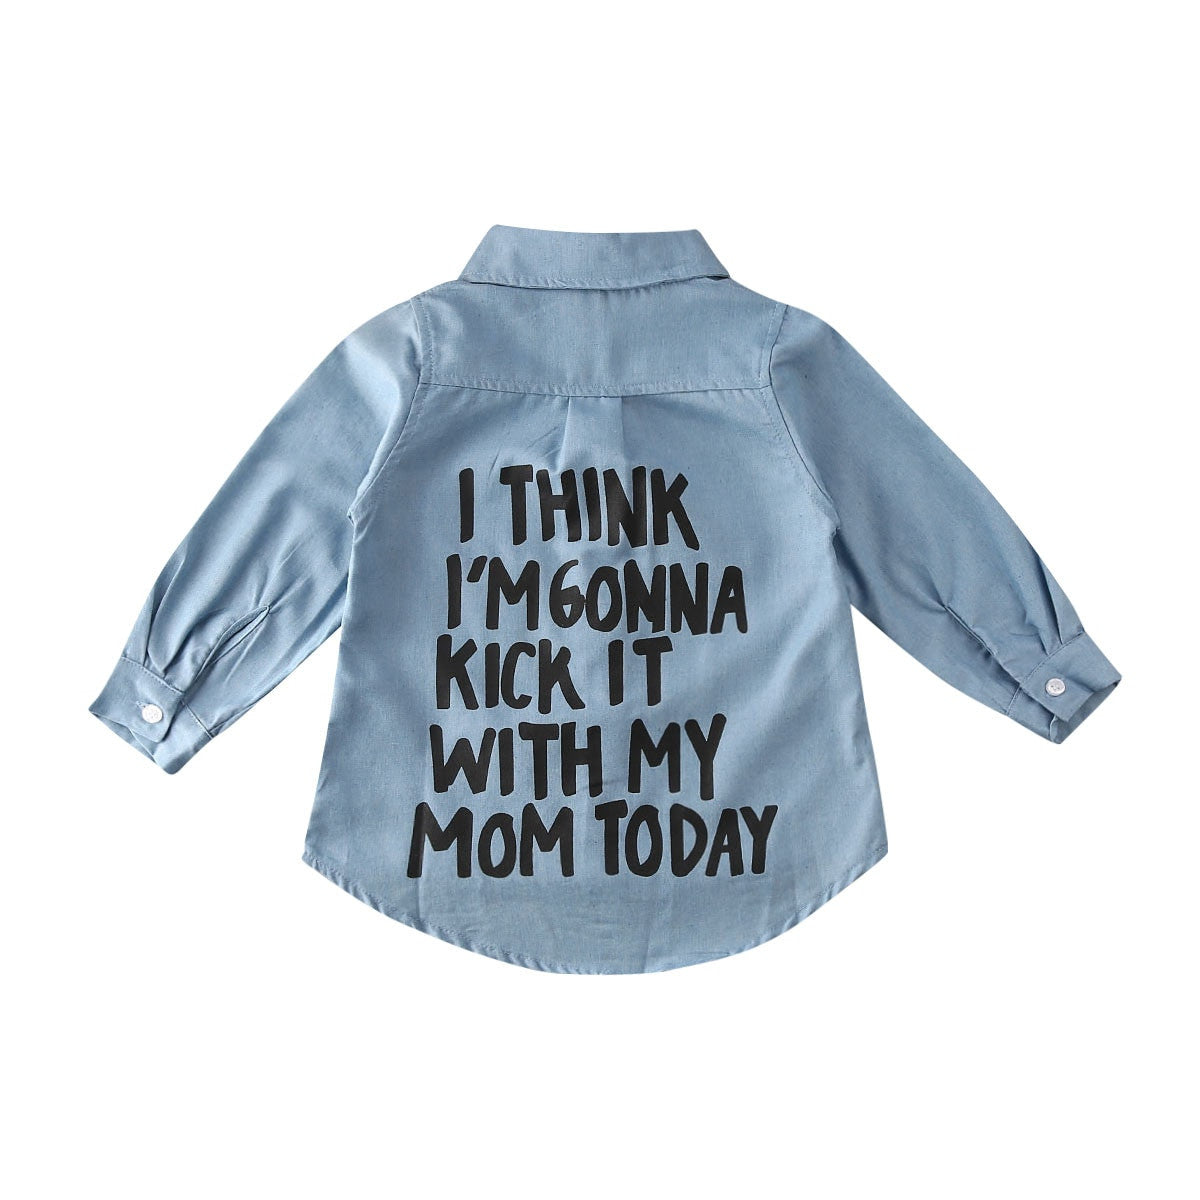 'I think I'm gonna kick it with my mom today' Jean Shirt